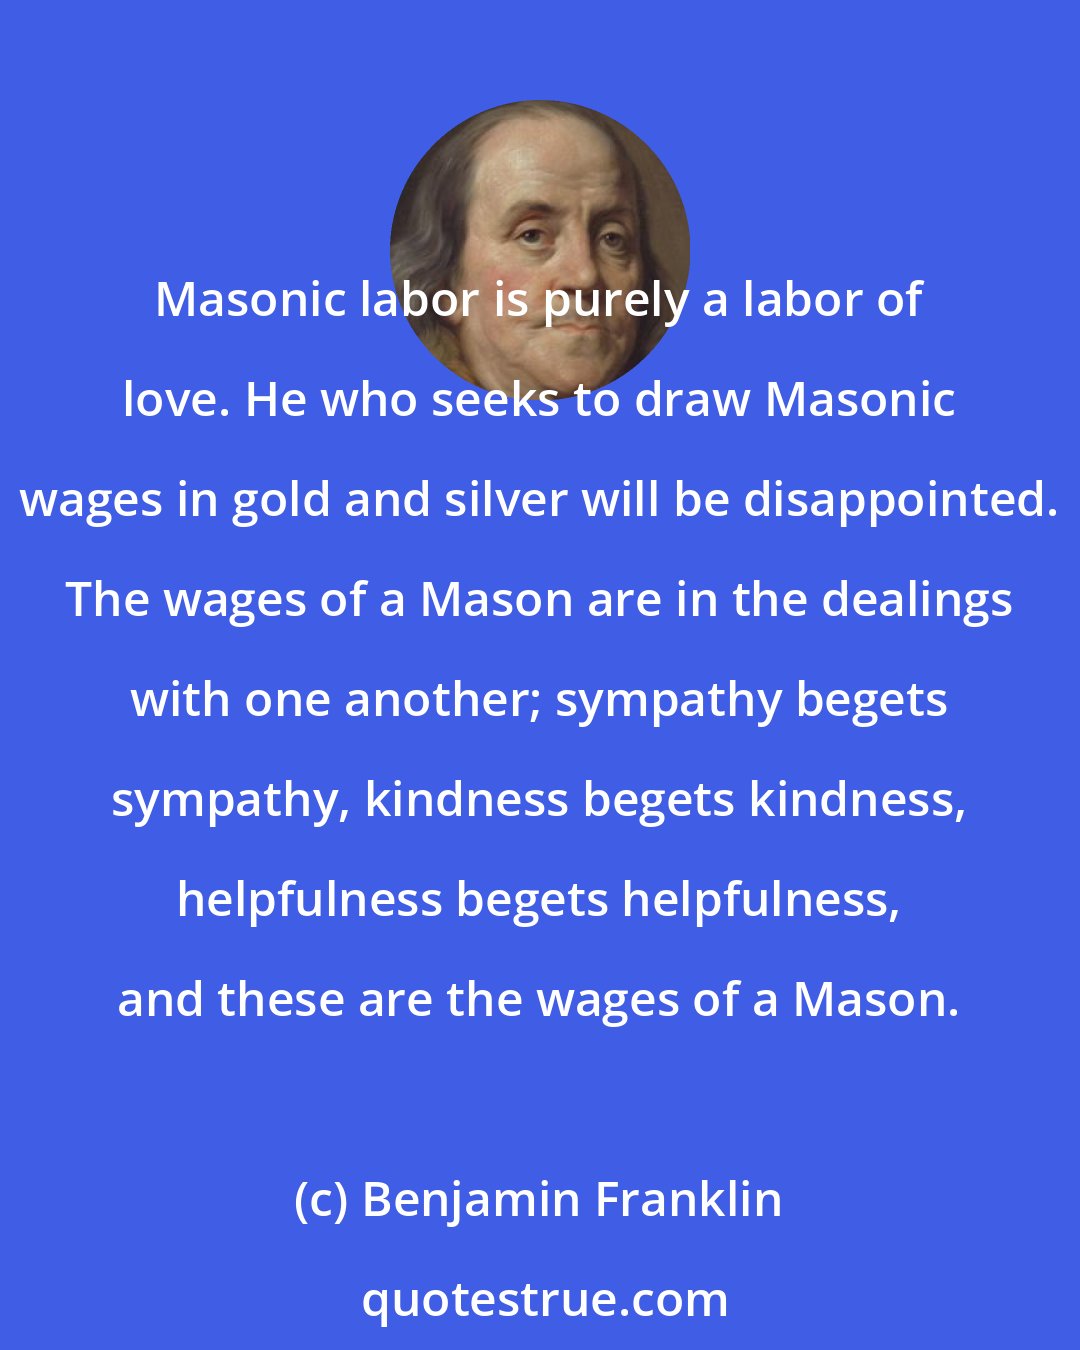 Benjamin Franklin: Masonic labor is purely a labor of love. He who seeks to draw Masonic wages in gold and silver will be disappointed. The wages of a Mason are in the dealings with one another; sympathy begets sympathy, kindness begets kindness, helpfulness begets helpfulness, and these are the wages of a Mason.